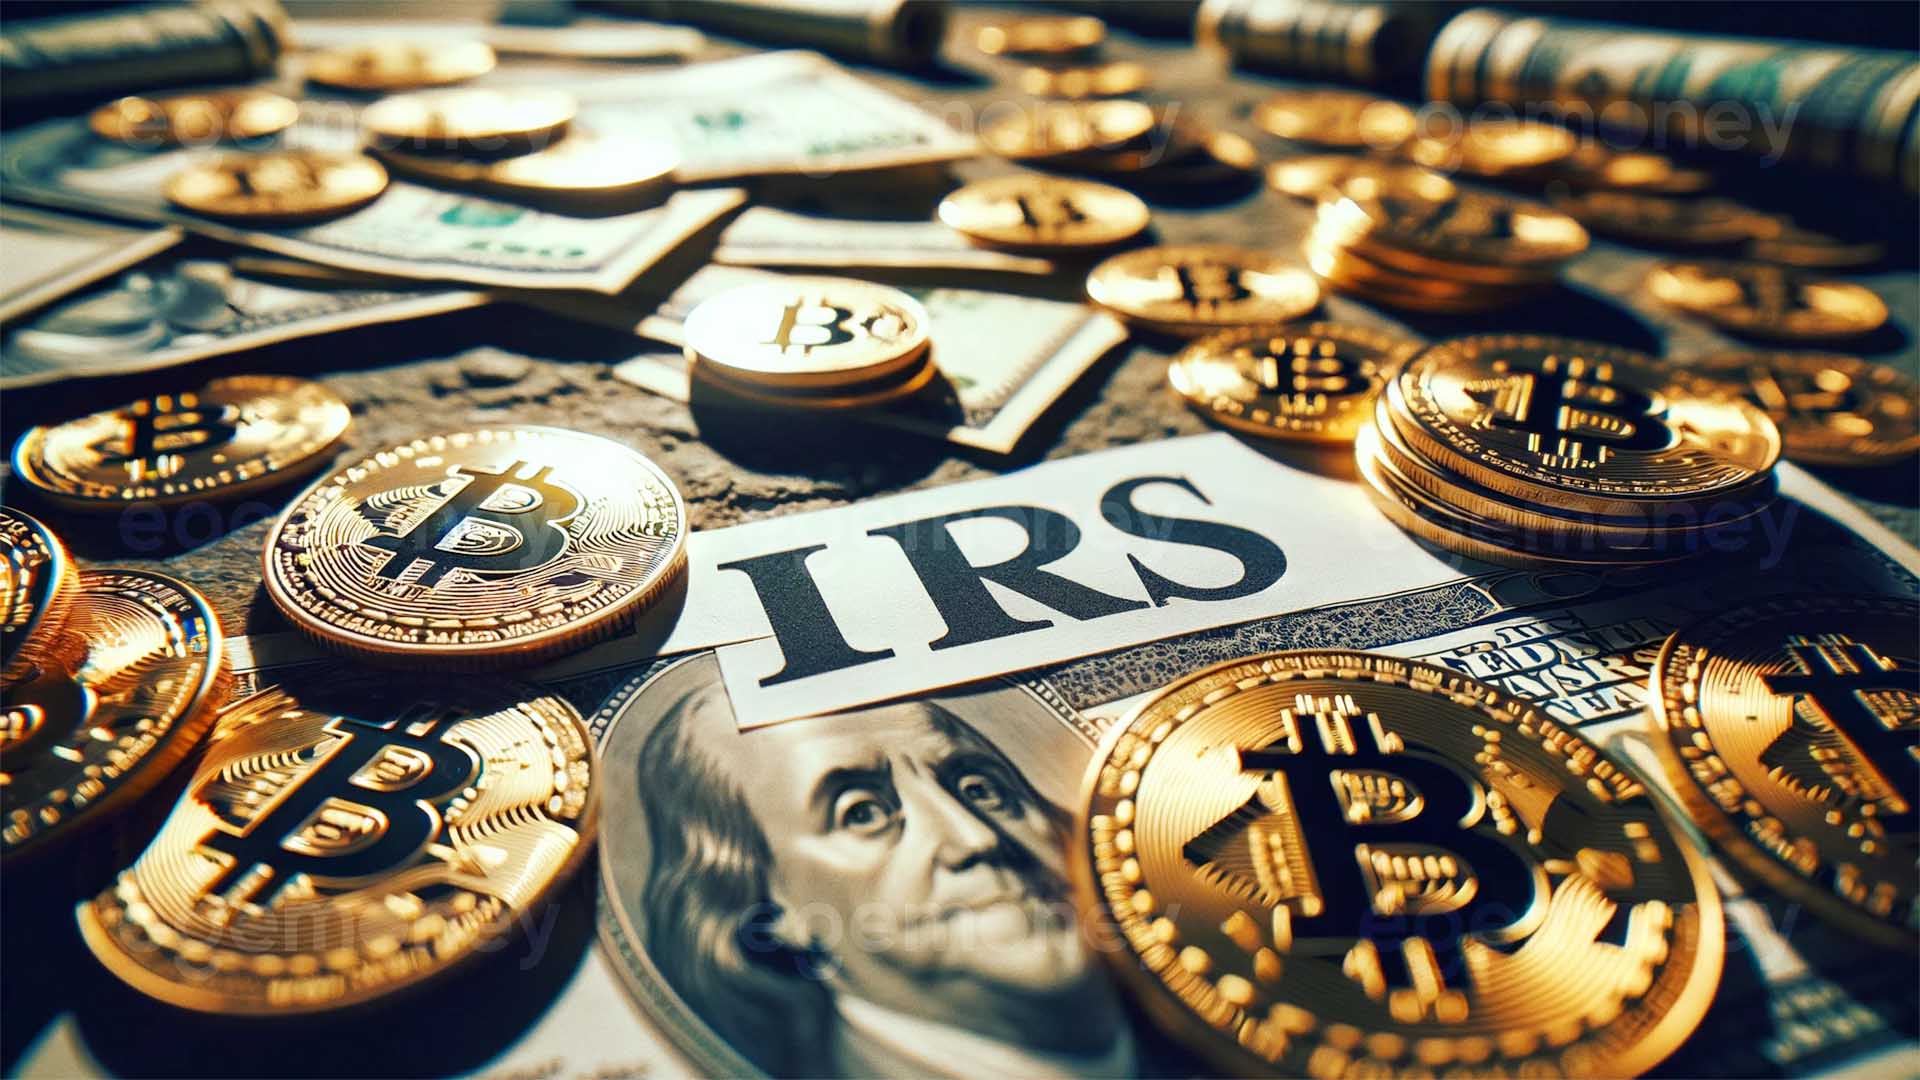 IRS Adds New Questions to Tax Forms for Crypto Income